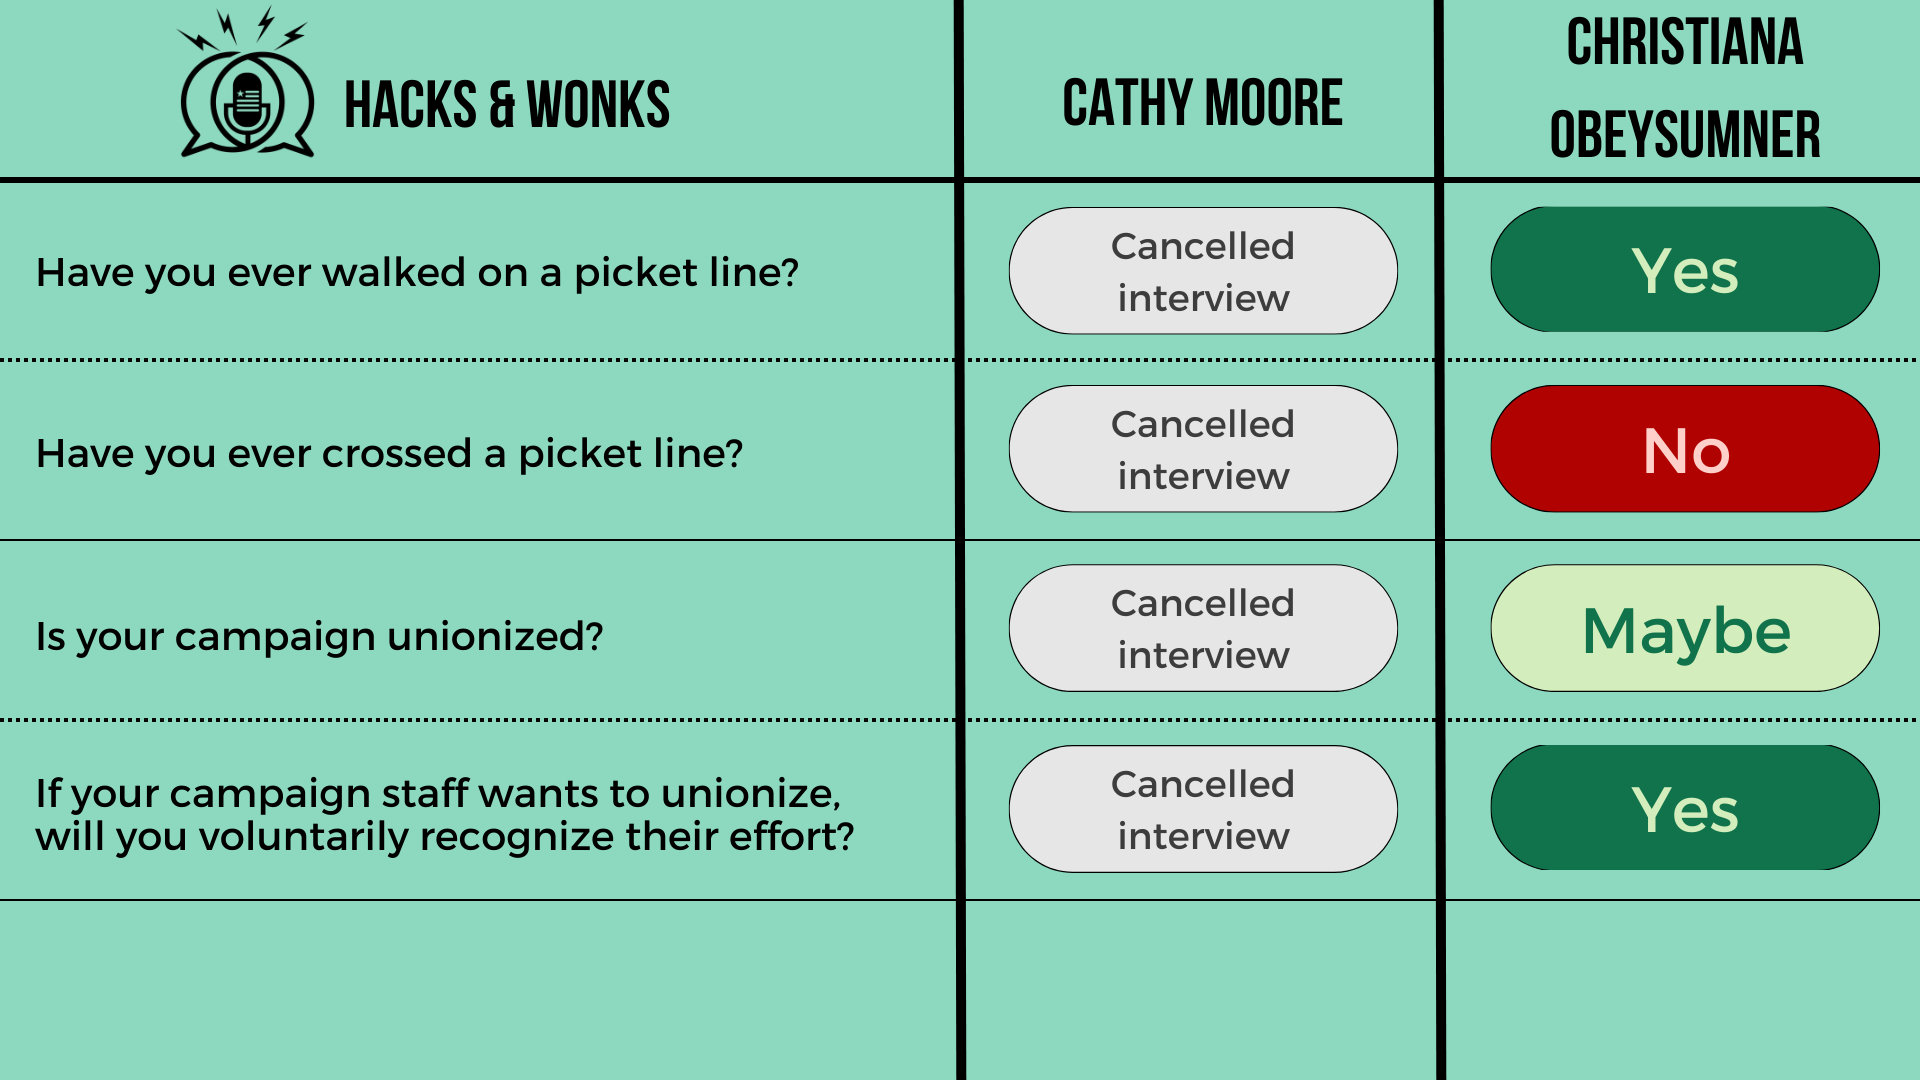 Q: Have you ever walked on a picket line? Cathy Moore: Cancelled interview, ChrisTiana ObeySumner: Yes  Q: Have you ever crossed a picket line? Cathy Moore: Cancelled interview, ChrisTiana ObeySumner: No  Q: Is your campaign unionized? Cathy Moore: C